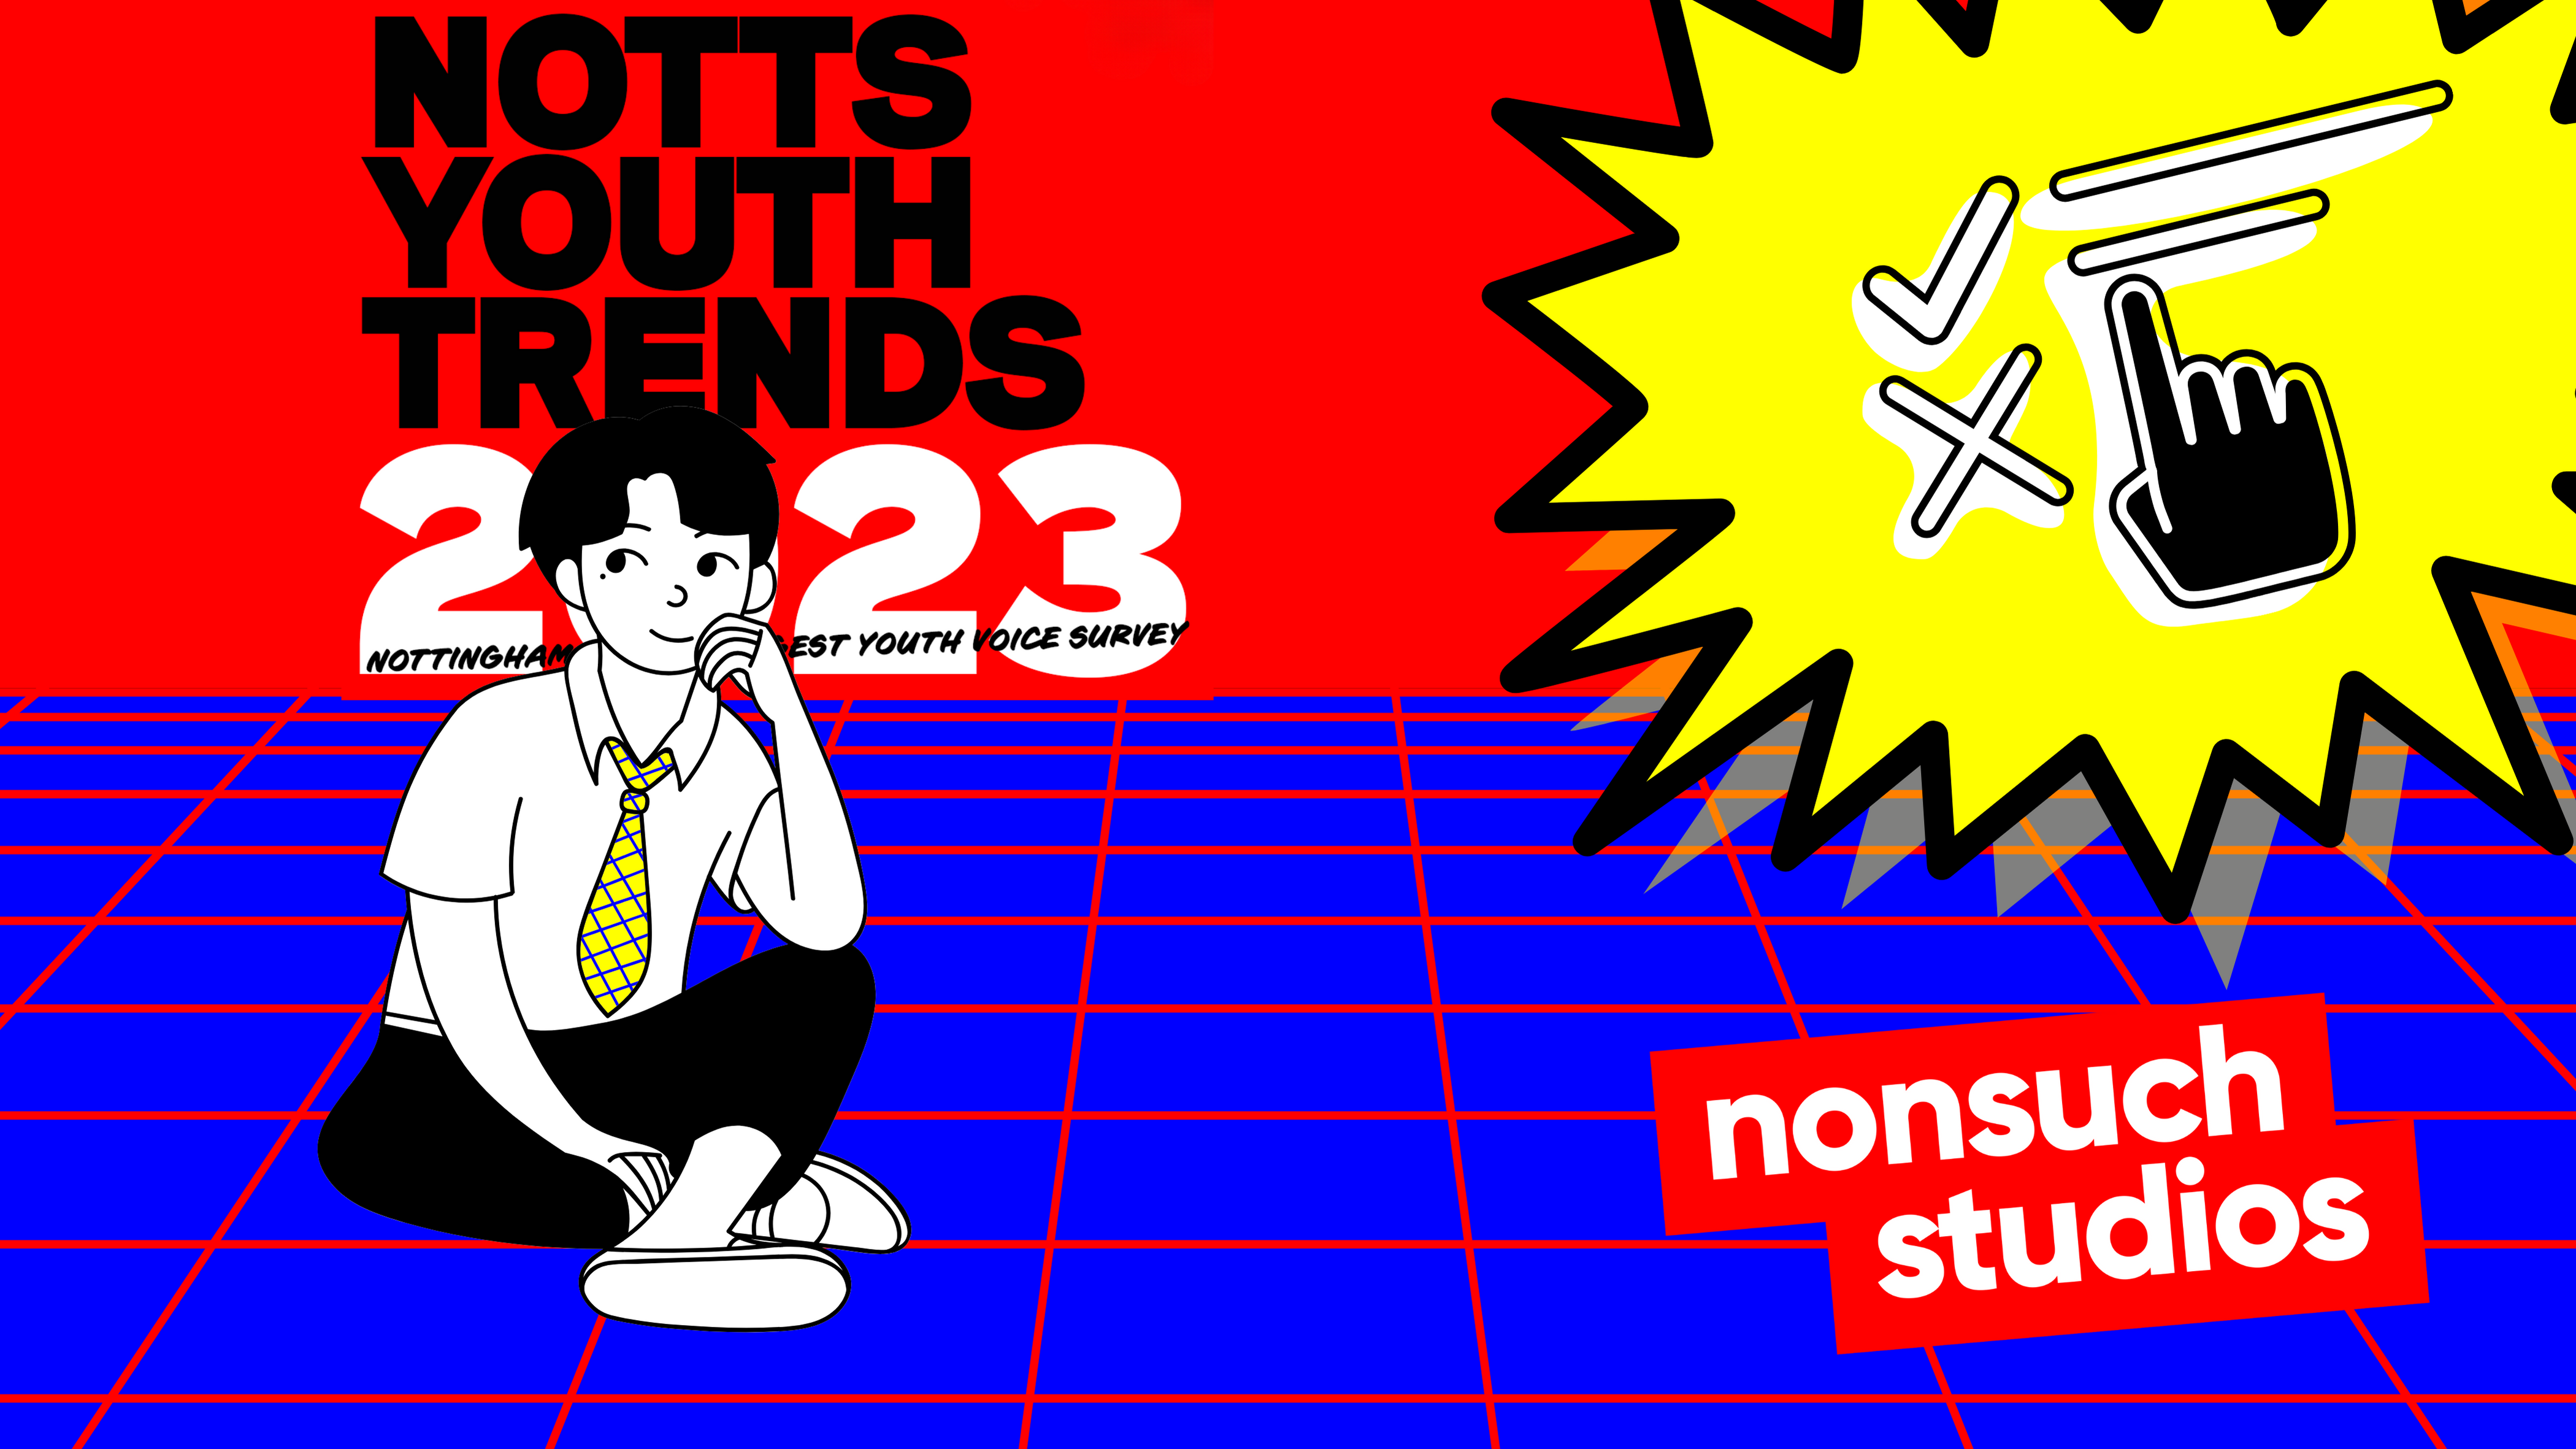 Illustration of a young person sat crossed legged on a blue floor with the words 'Notts Youth Trends 2023' above them.